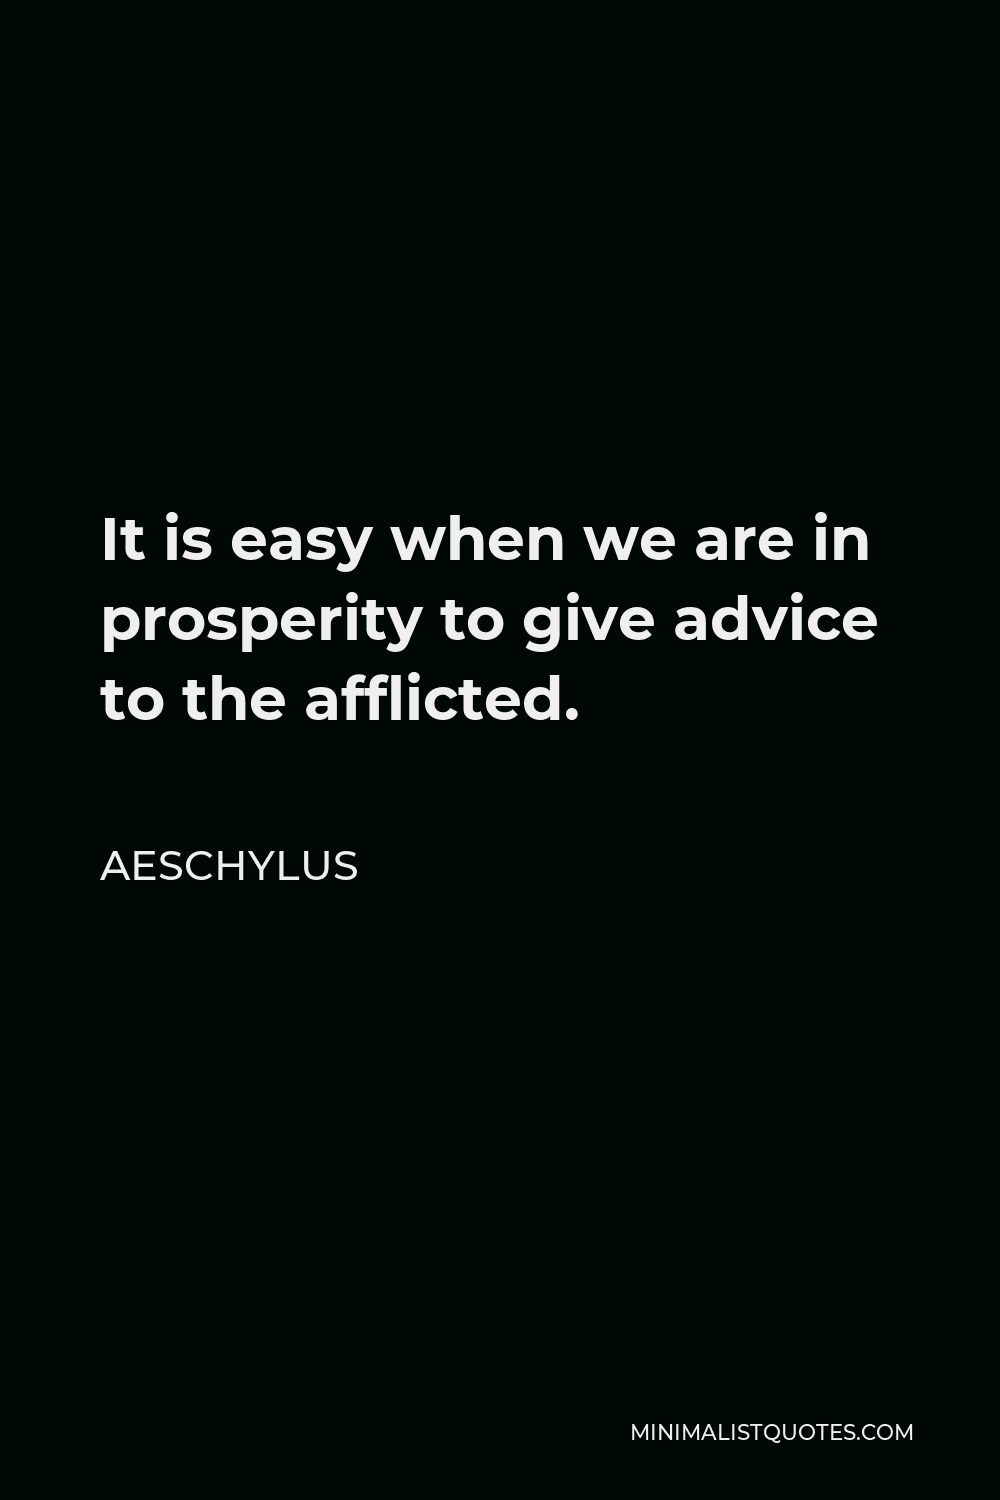 Aeschylus Quote - It is easy when we are in prosperity to give advice to the afflicted.